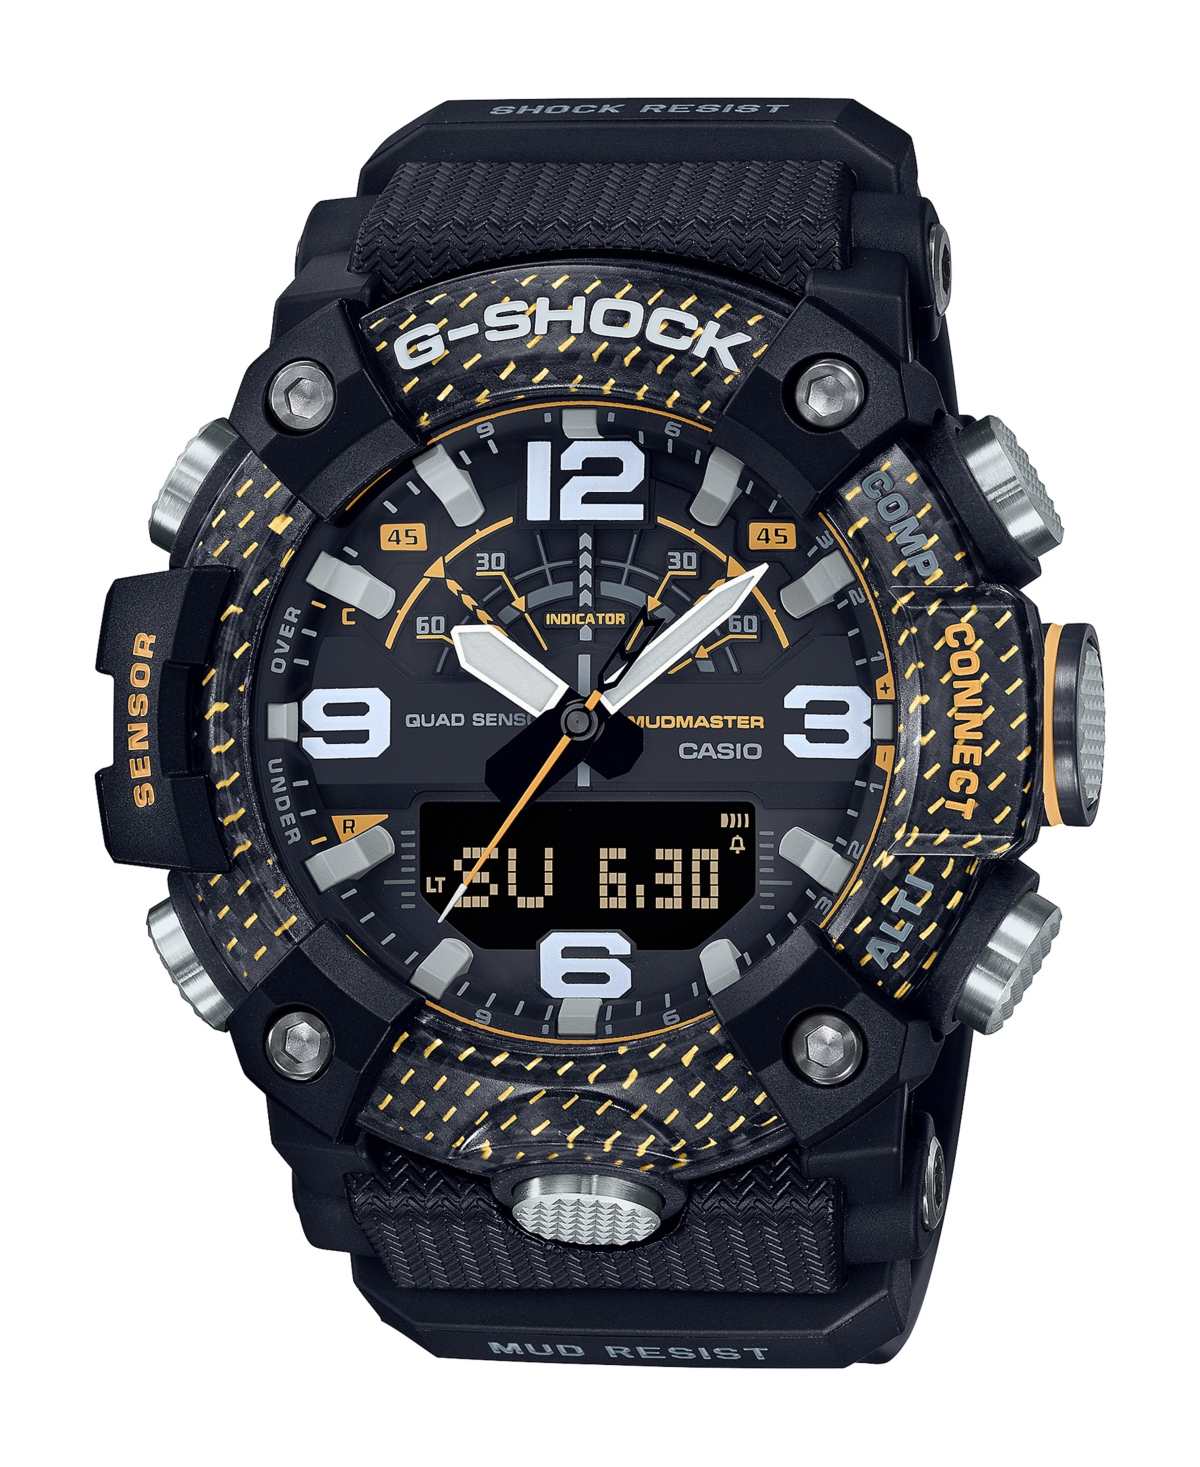 Men's Master of G Black and Yellow Resin Digital Watch 51.3mm, GGB100Y-1A - Black